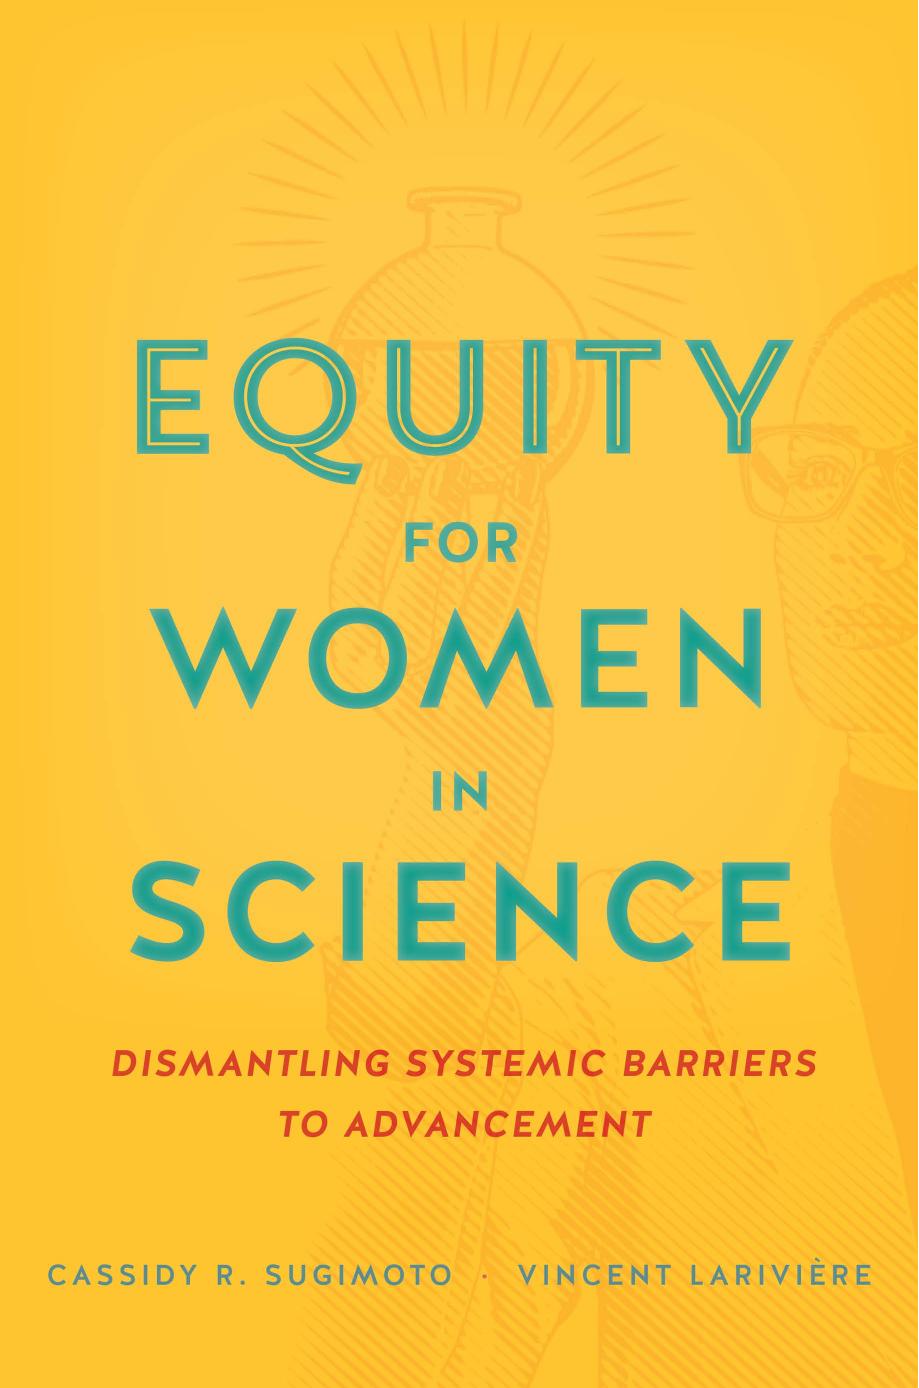 Equity for Women in Science by Cassidy R. Sugimoto and Vincent Larivière